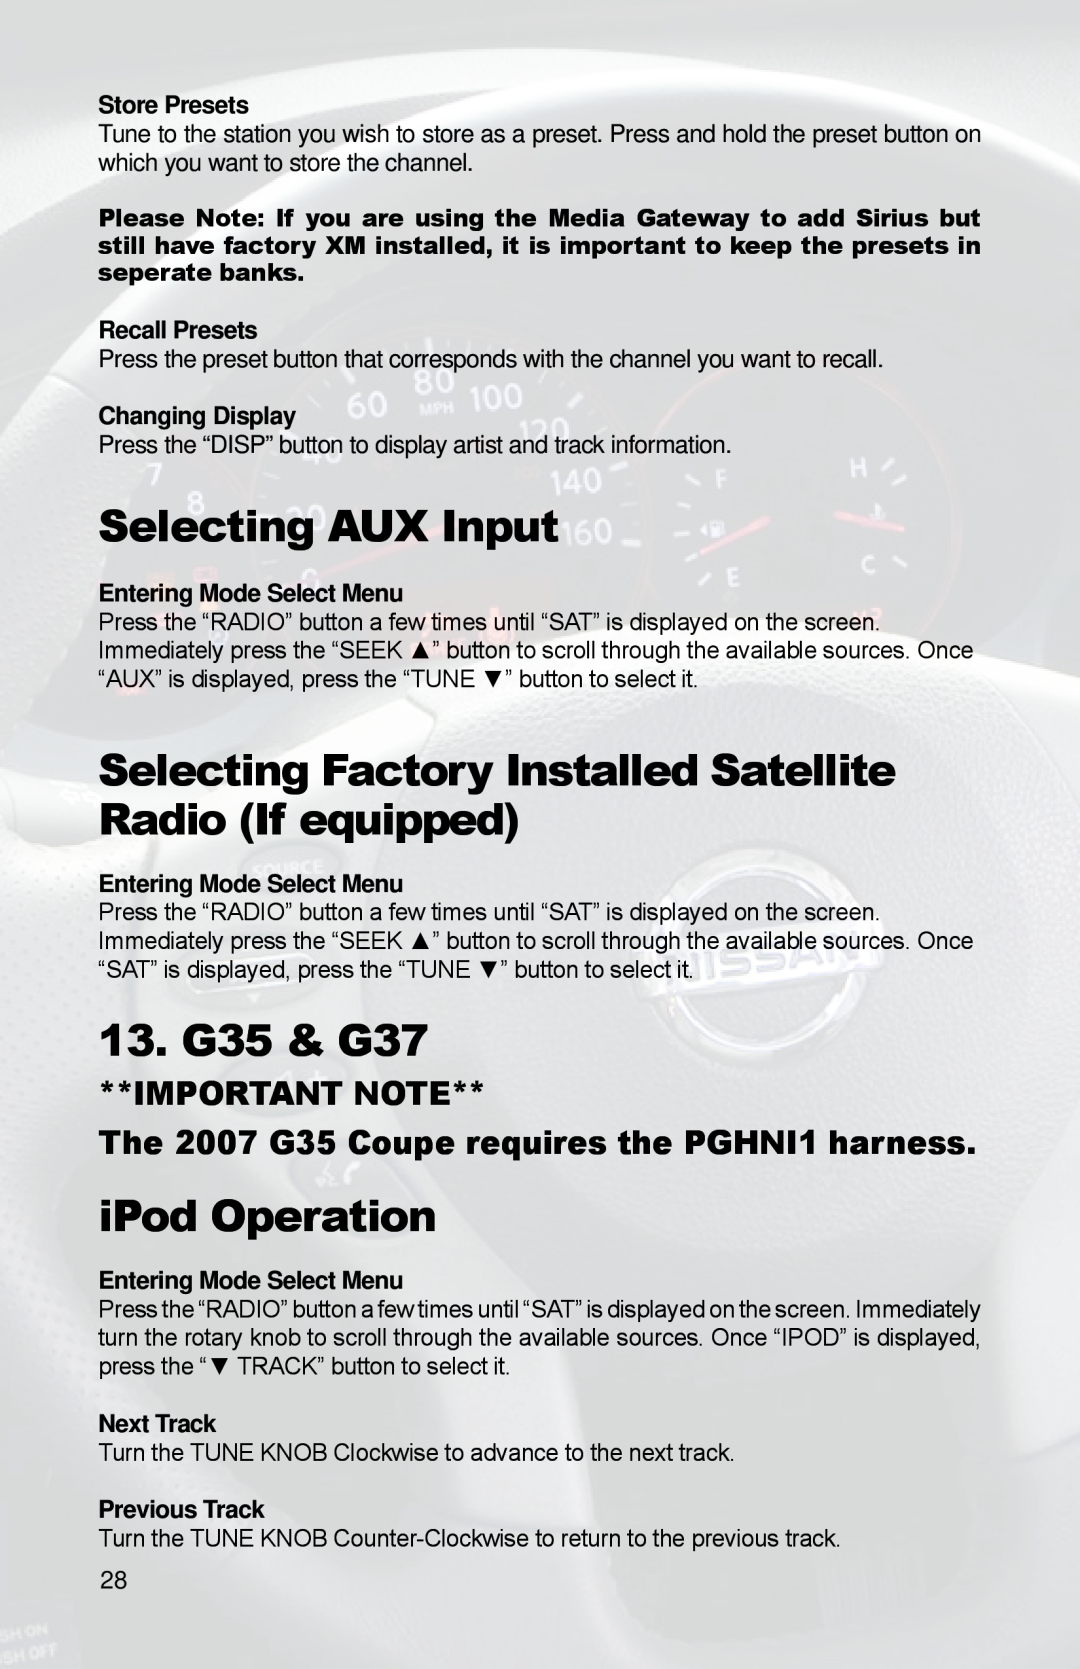 iSimple PGHNI2 owner manual 13. G35 & G37, Selecting AUX Input, iPod Operation, Important Note 